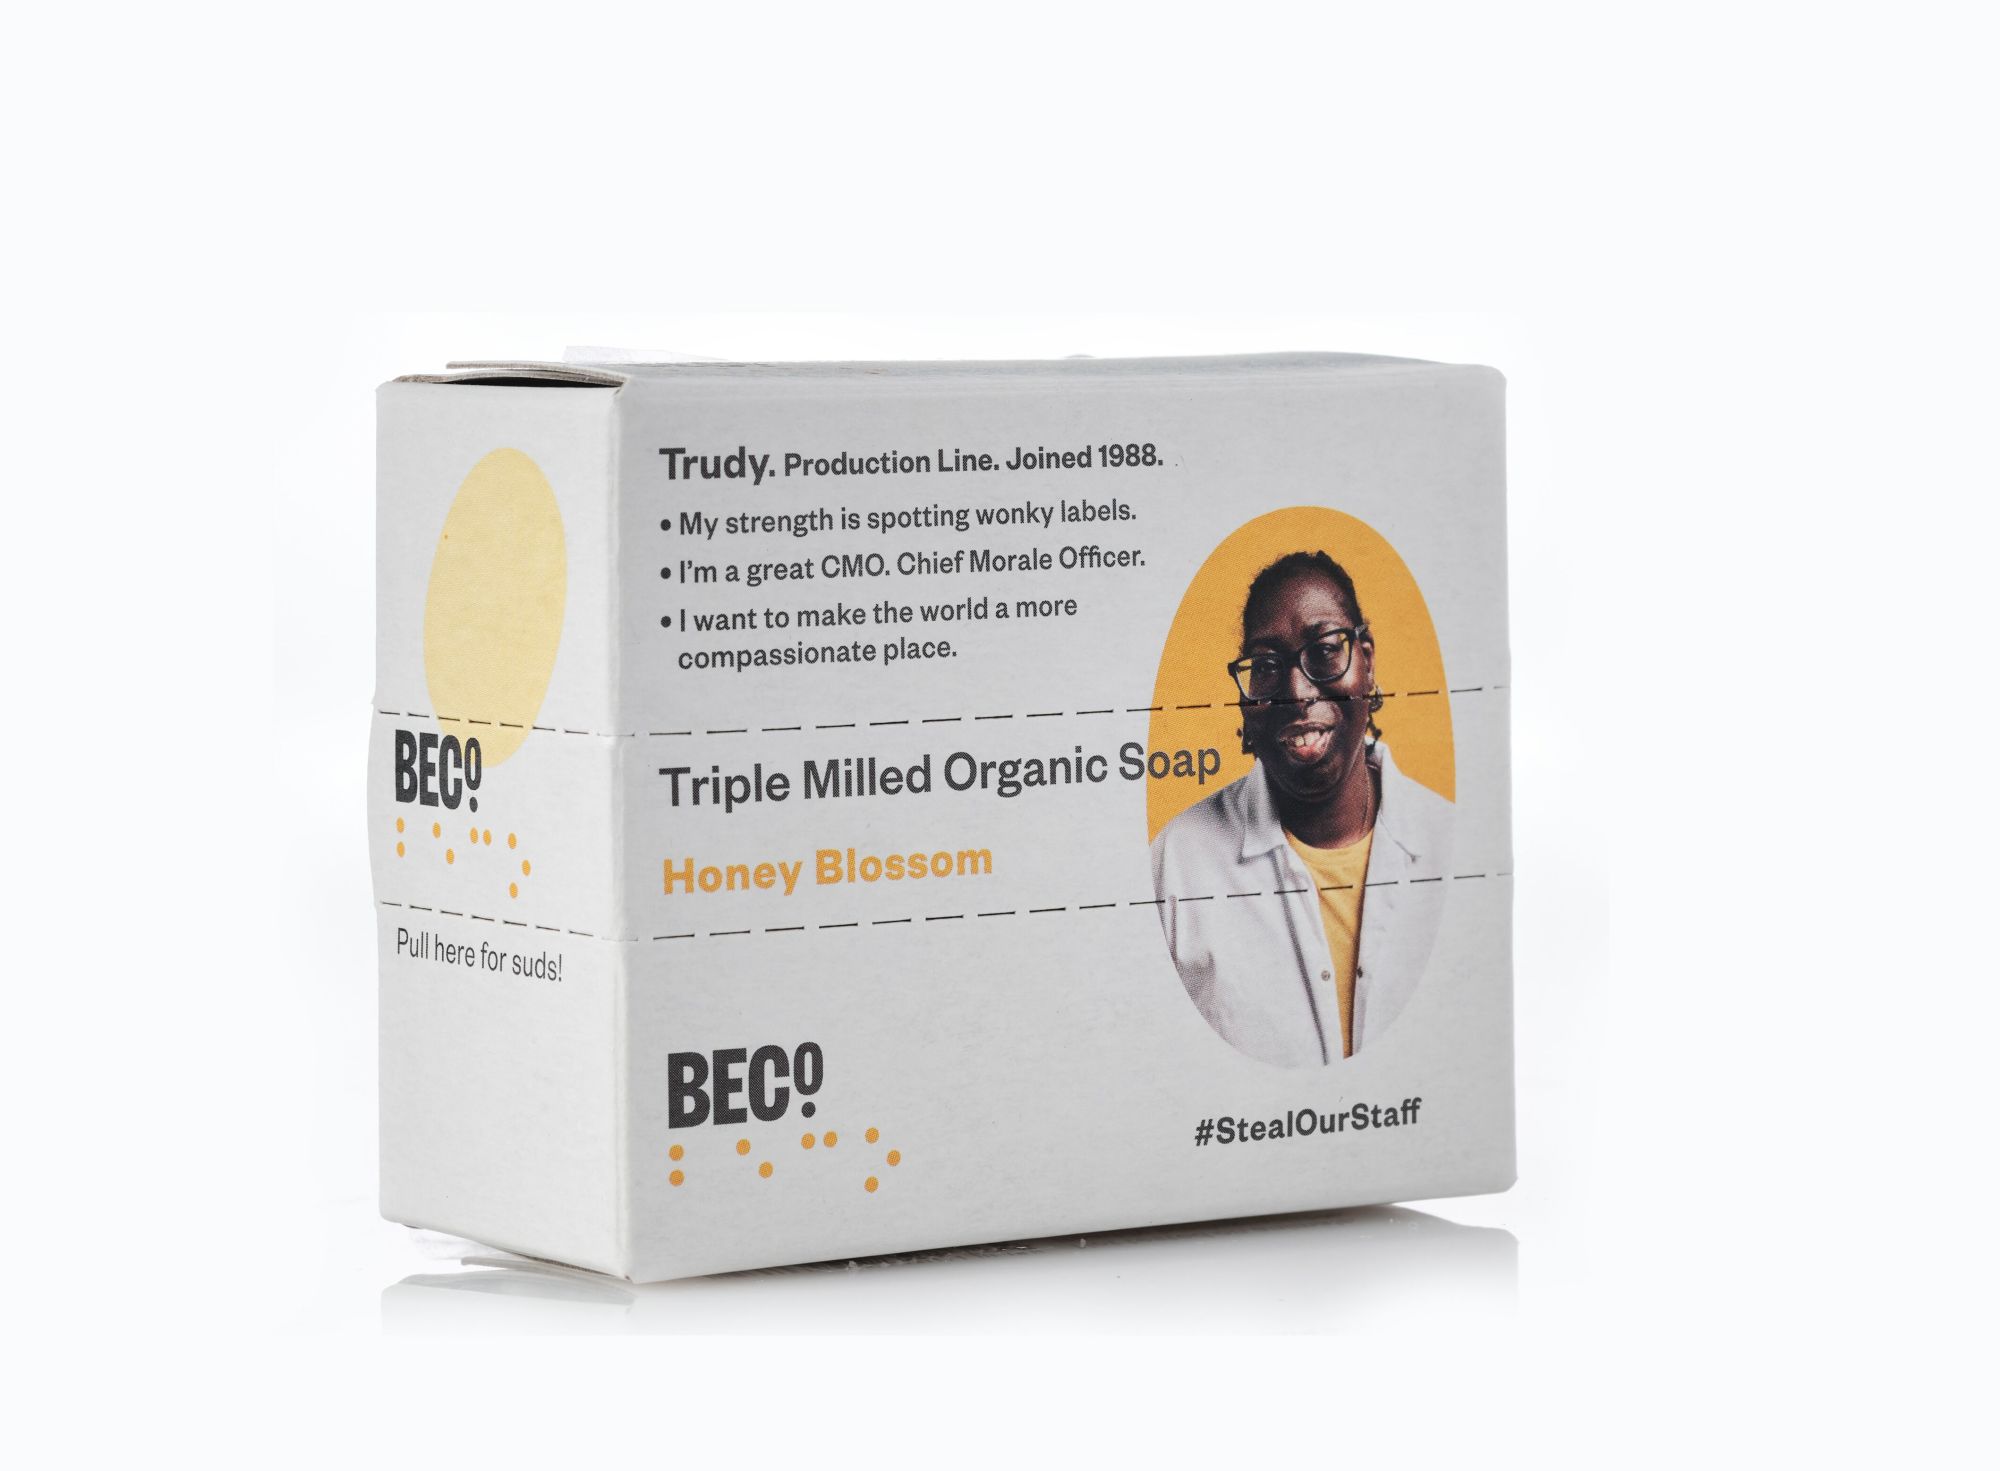 A staff profile on a box of BECO soap